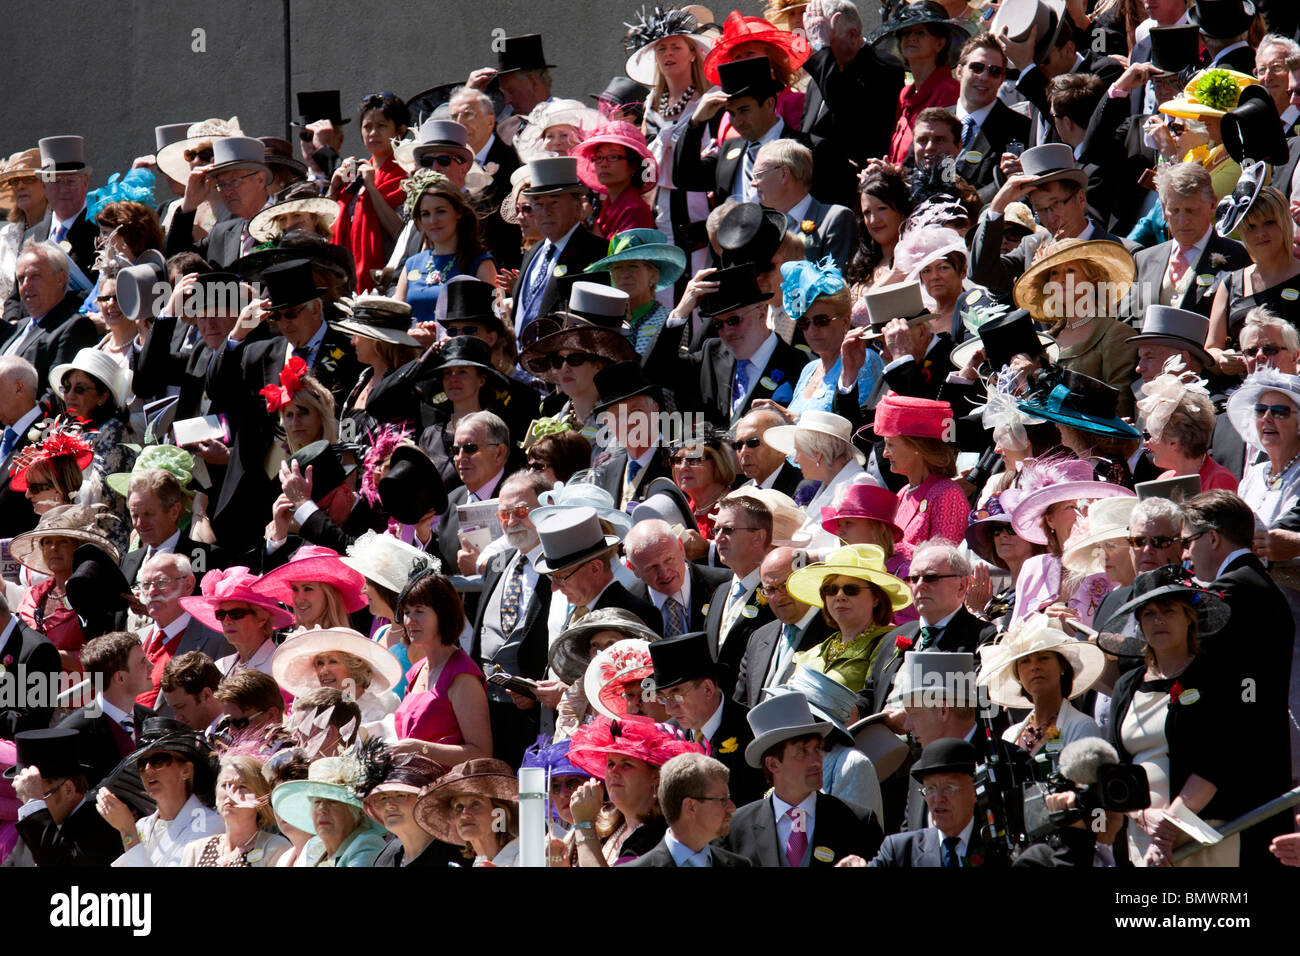 A crowd in the Royal Enclosure at the Royal Ascot horse race meeting in hats Stock Photo